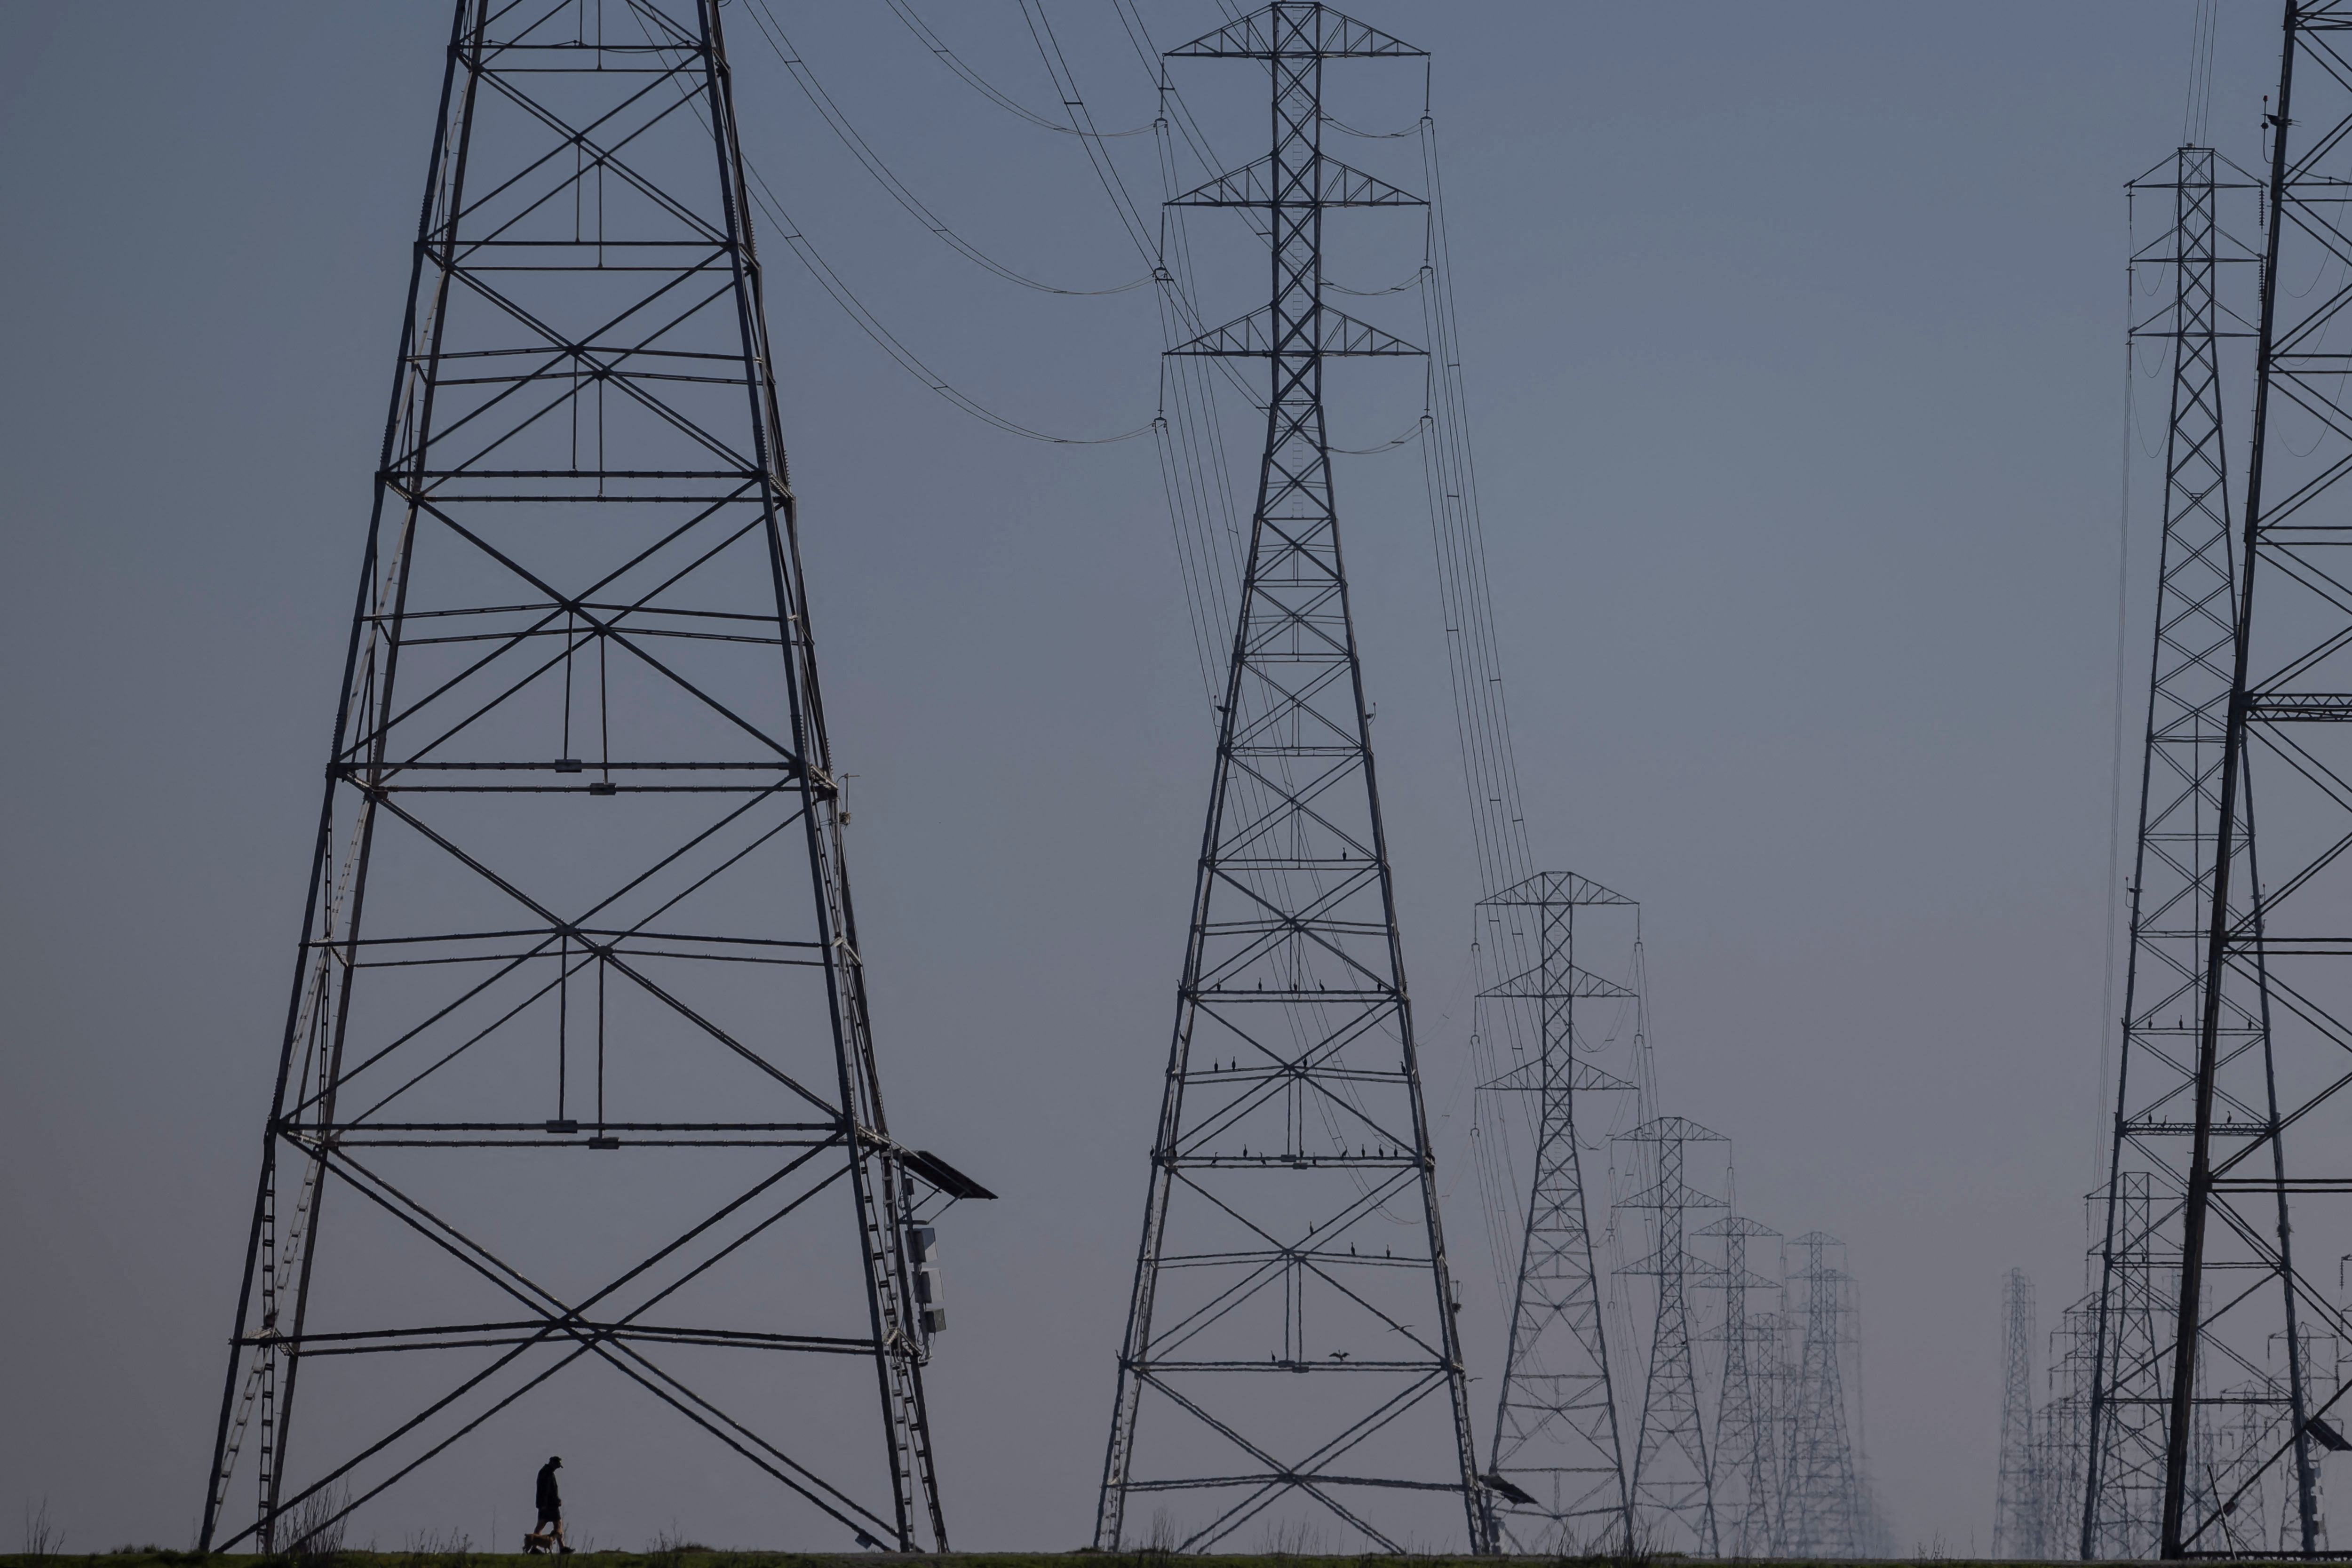 Power grid towers at Bair Island State Marine Park in Redwood City, California, United States